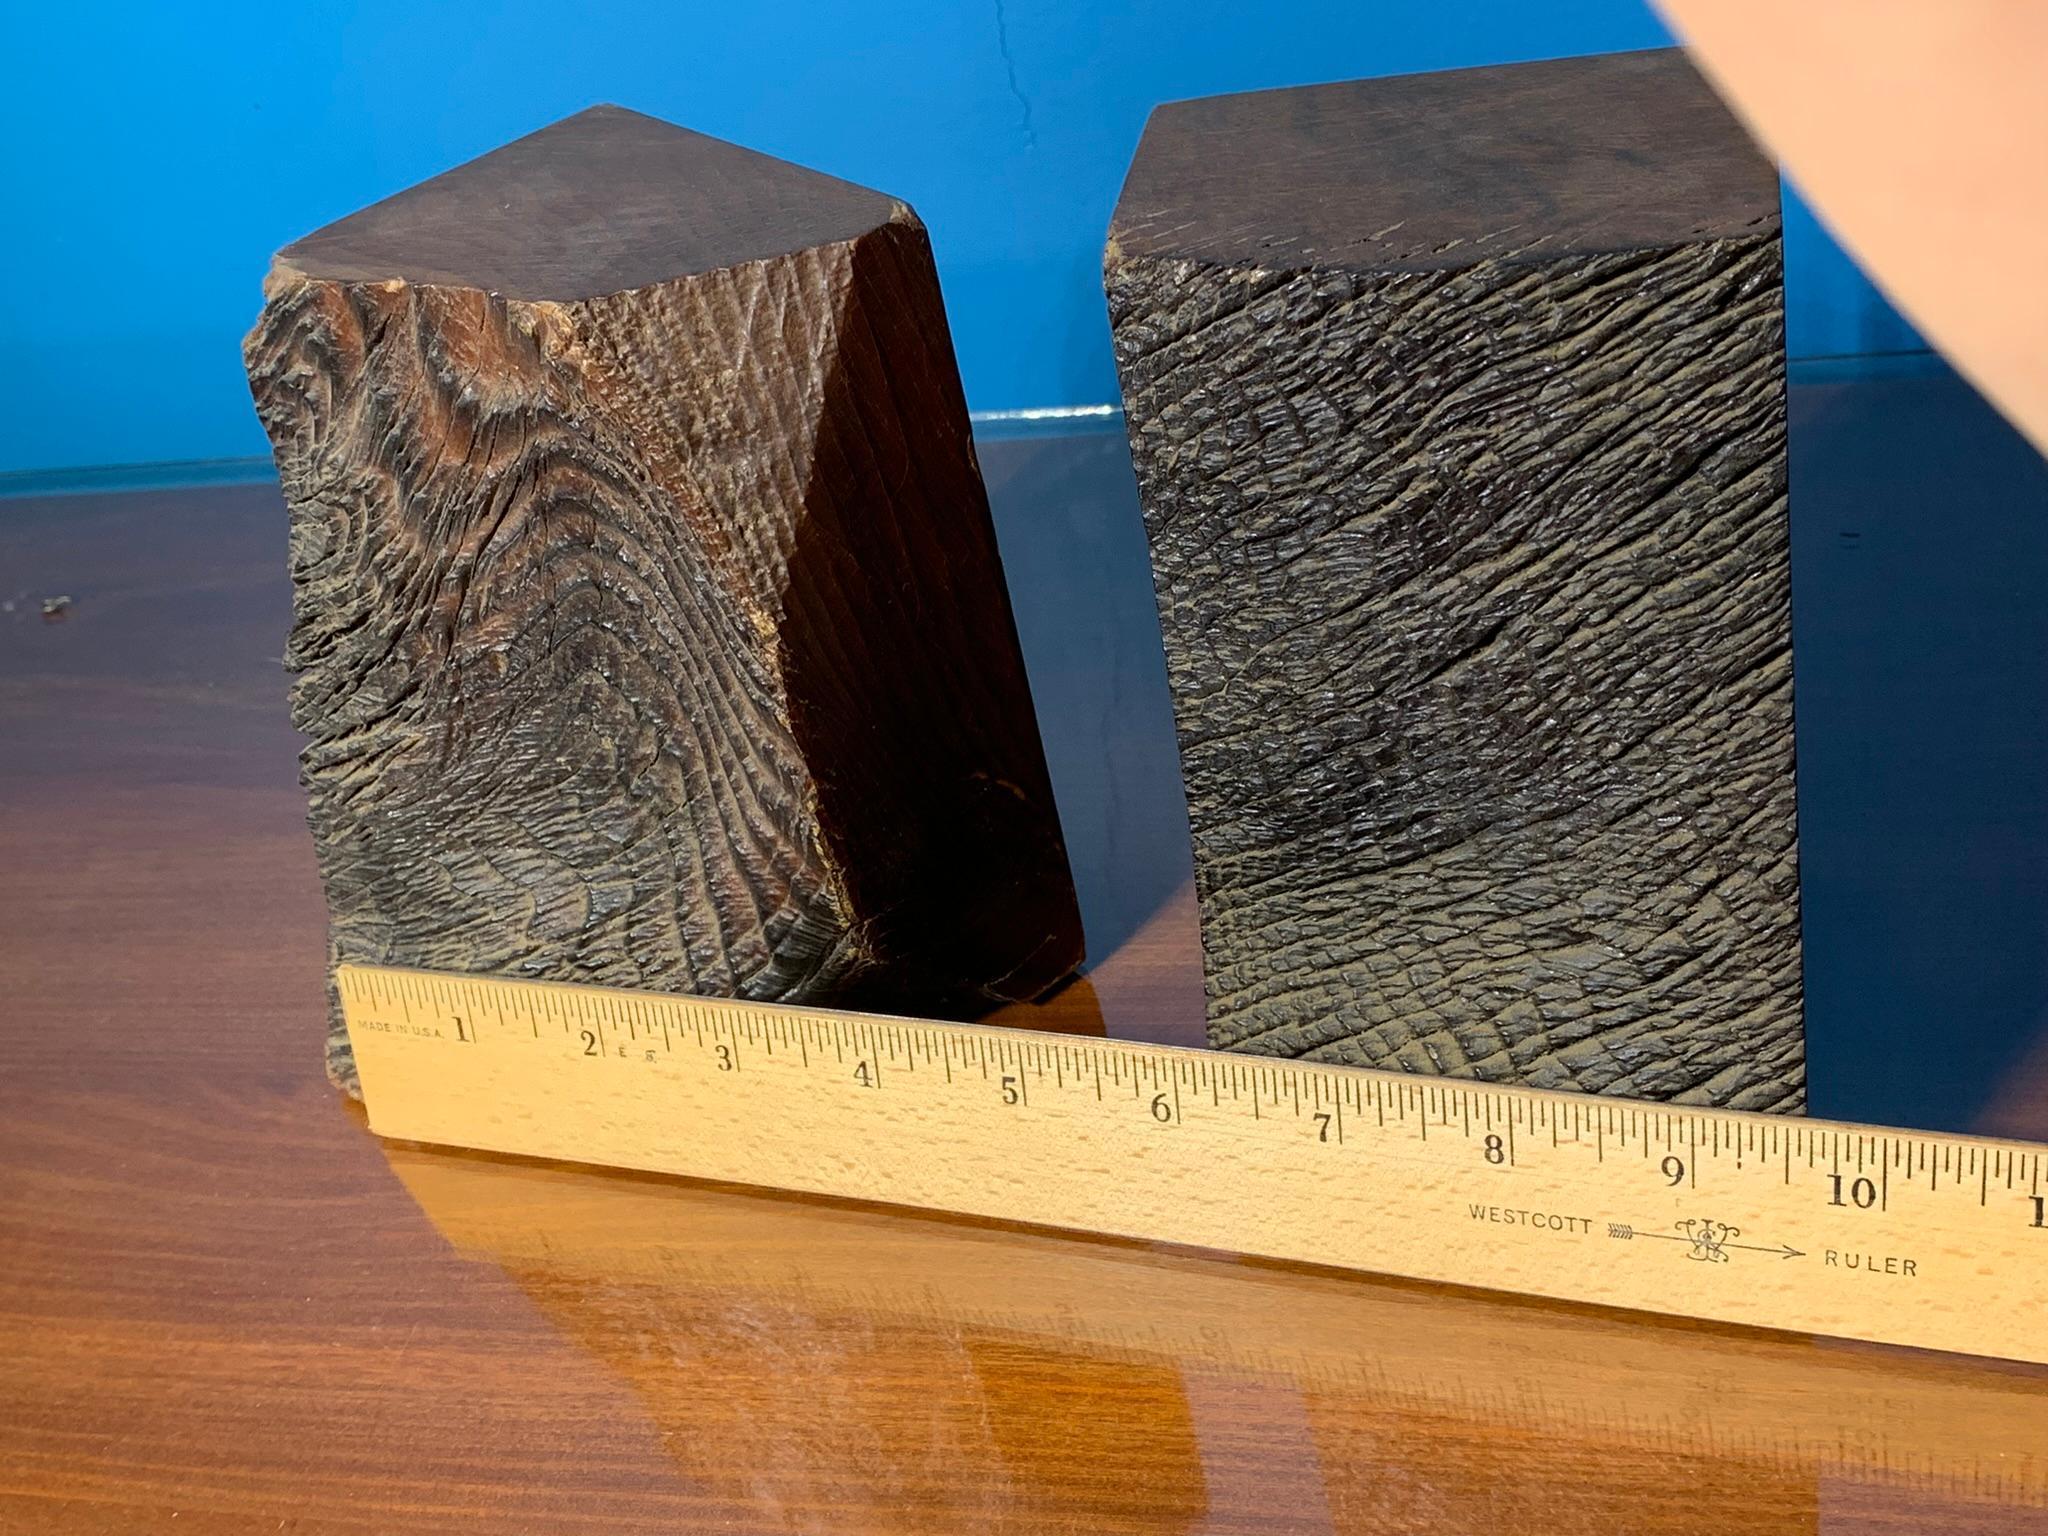 Pair of Wood Bookends